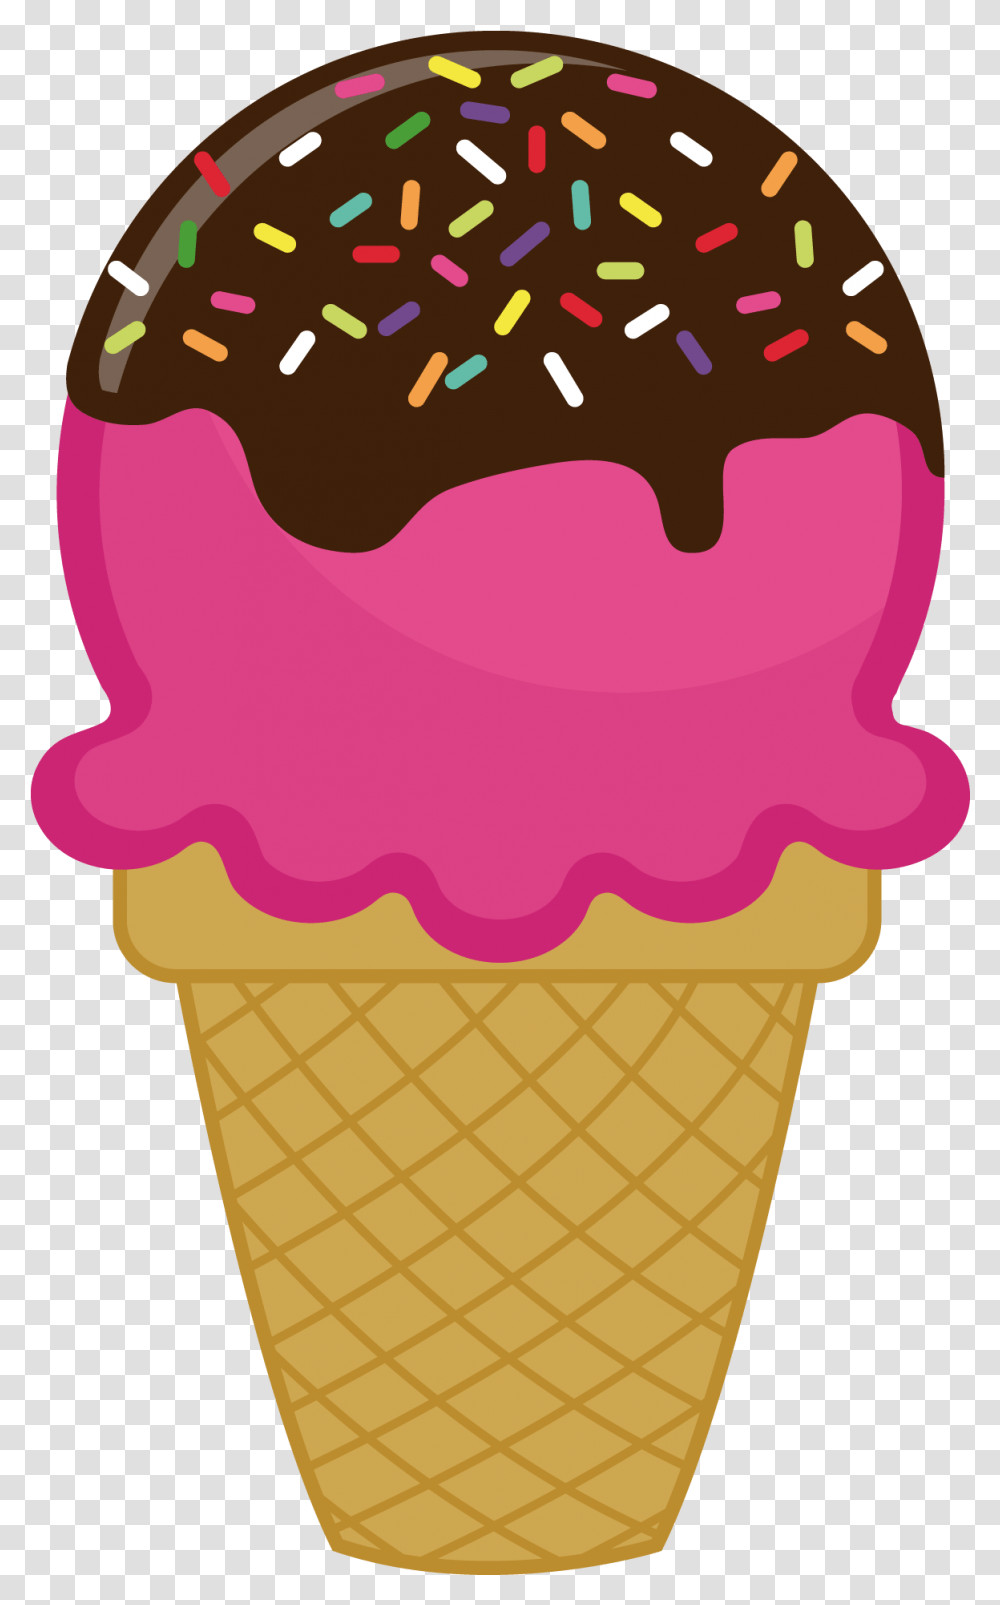 Uy Que Rico Ice Cream Clipart, Dessert, Food, Creme, Sweets Transparent Png